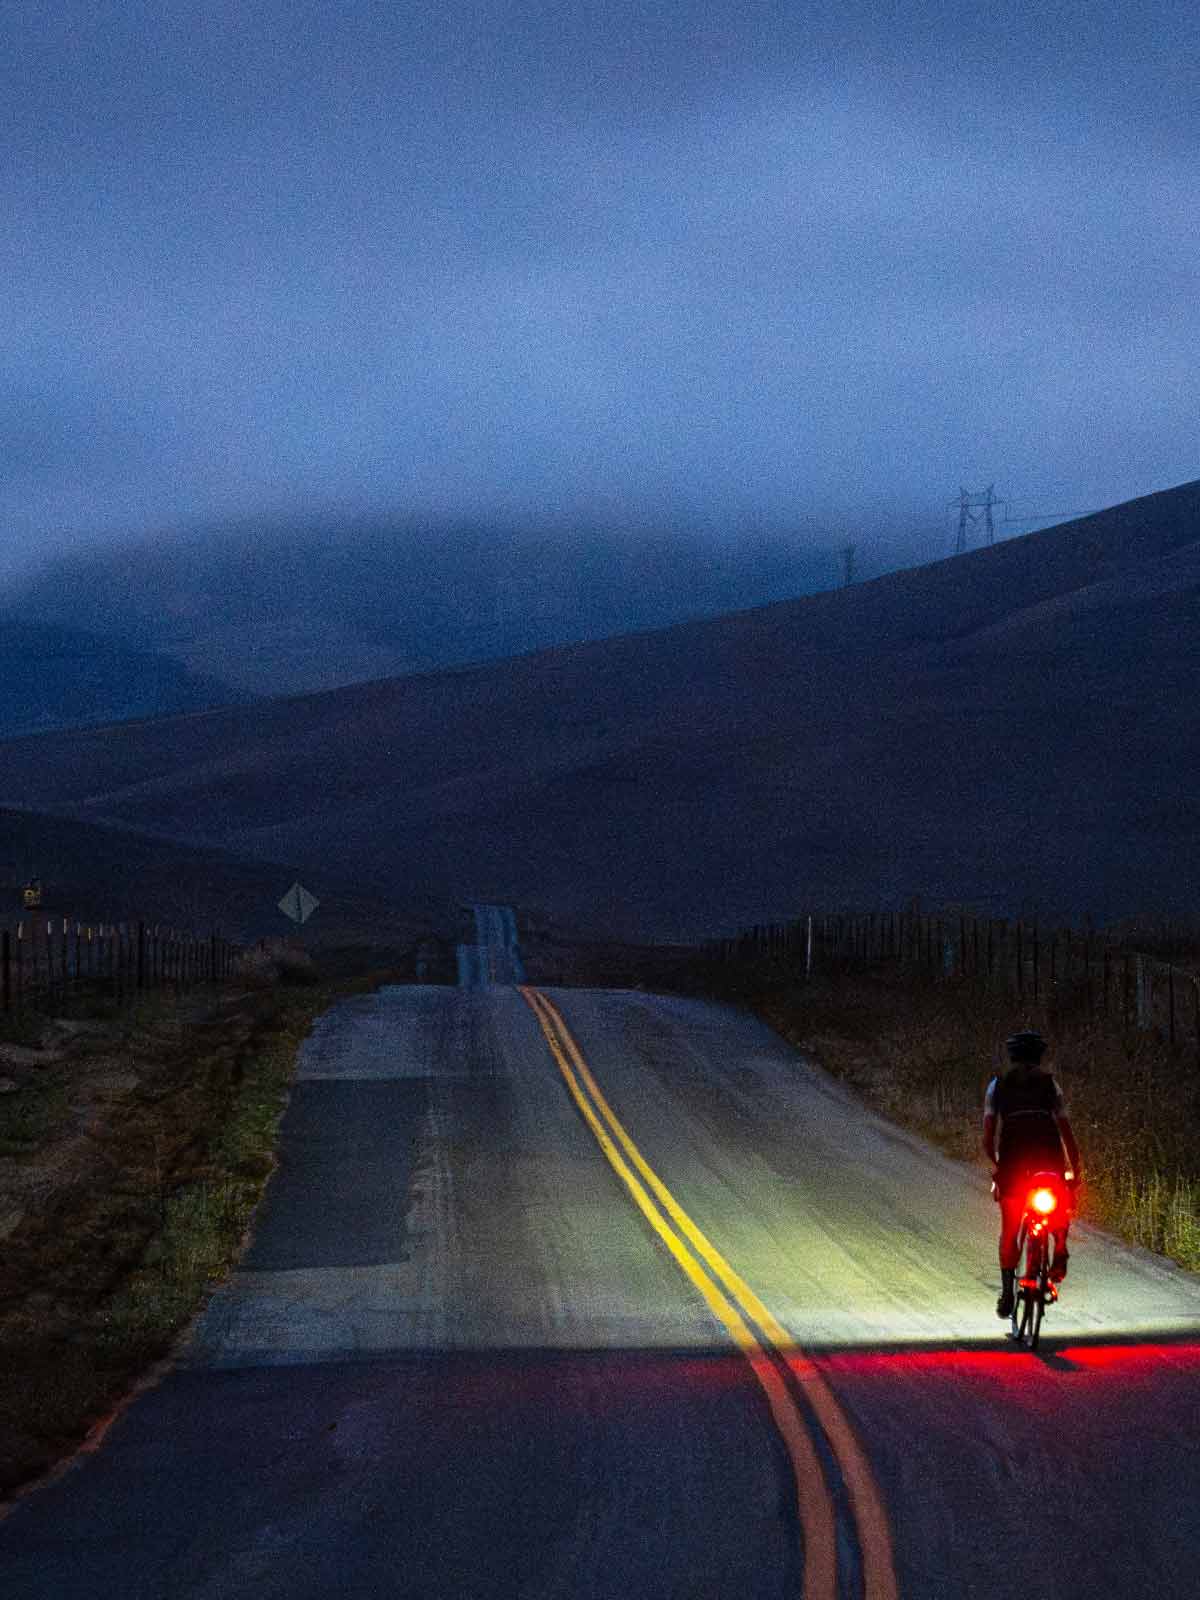 Cyclist on the road in the dark with front leading the way and bright taillight 